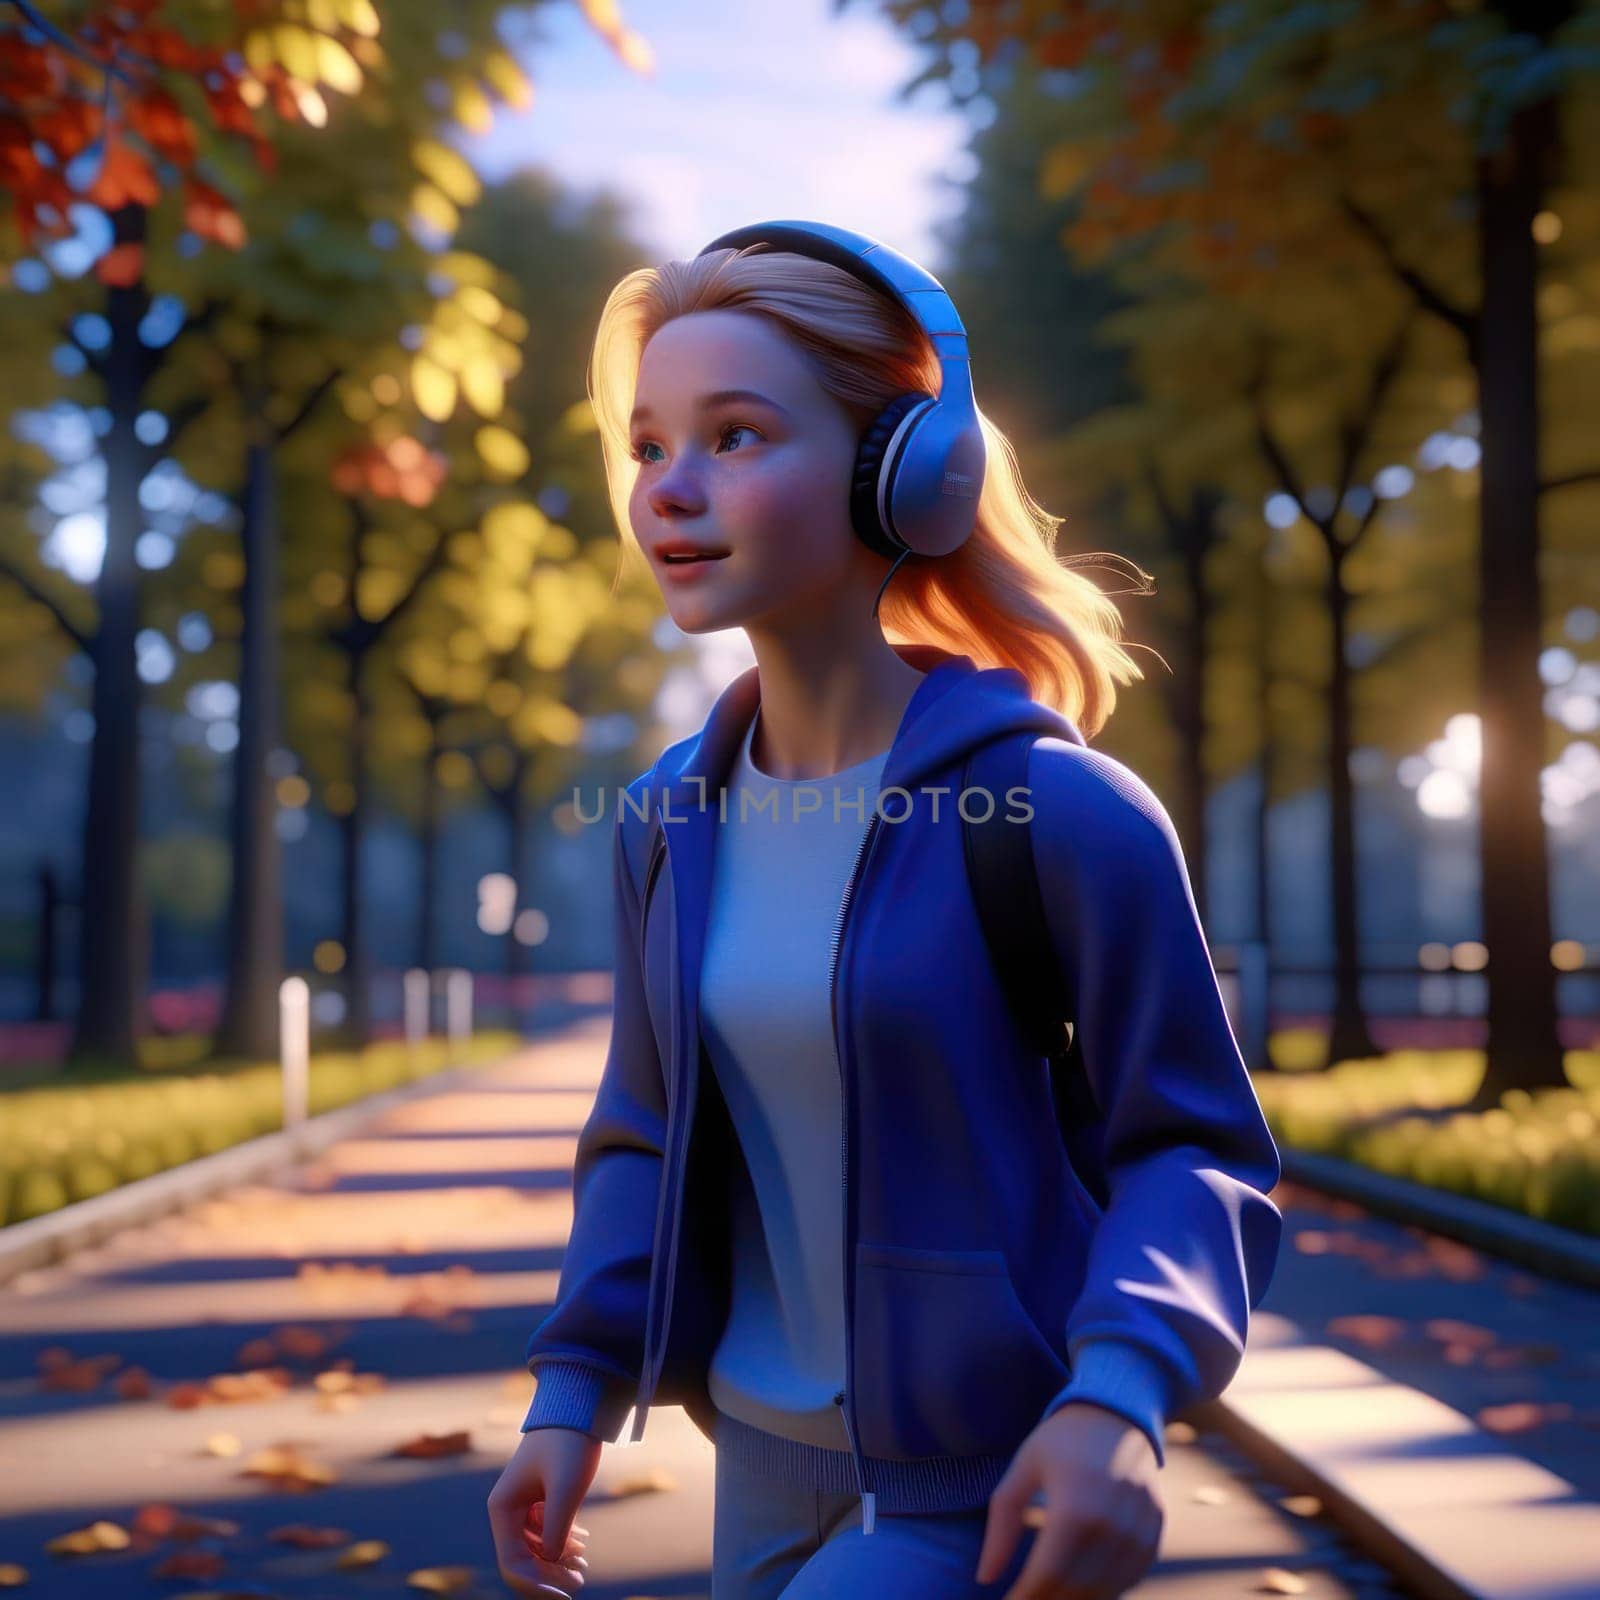 Girl jogging. Image created by AI